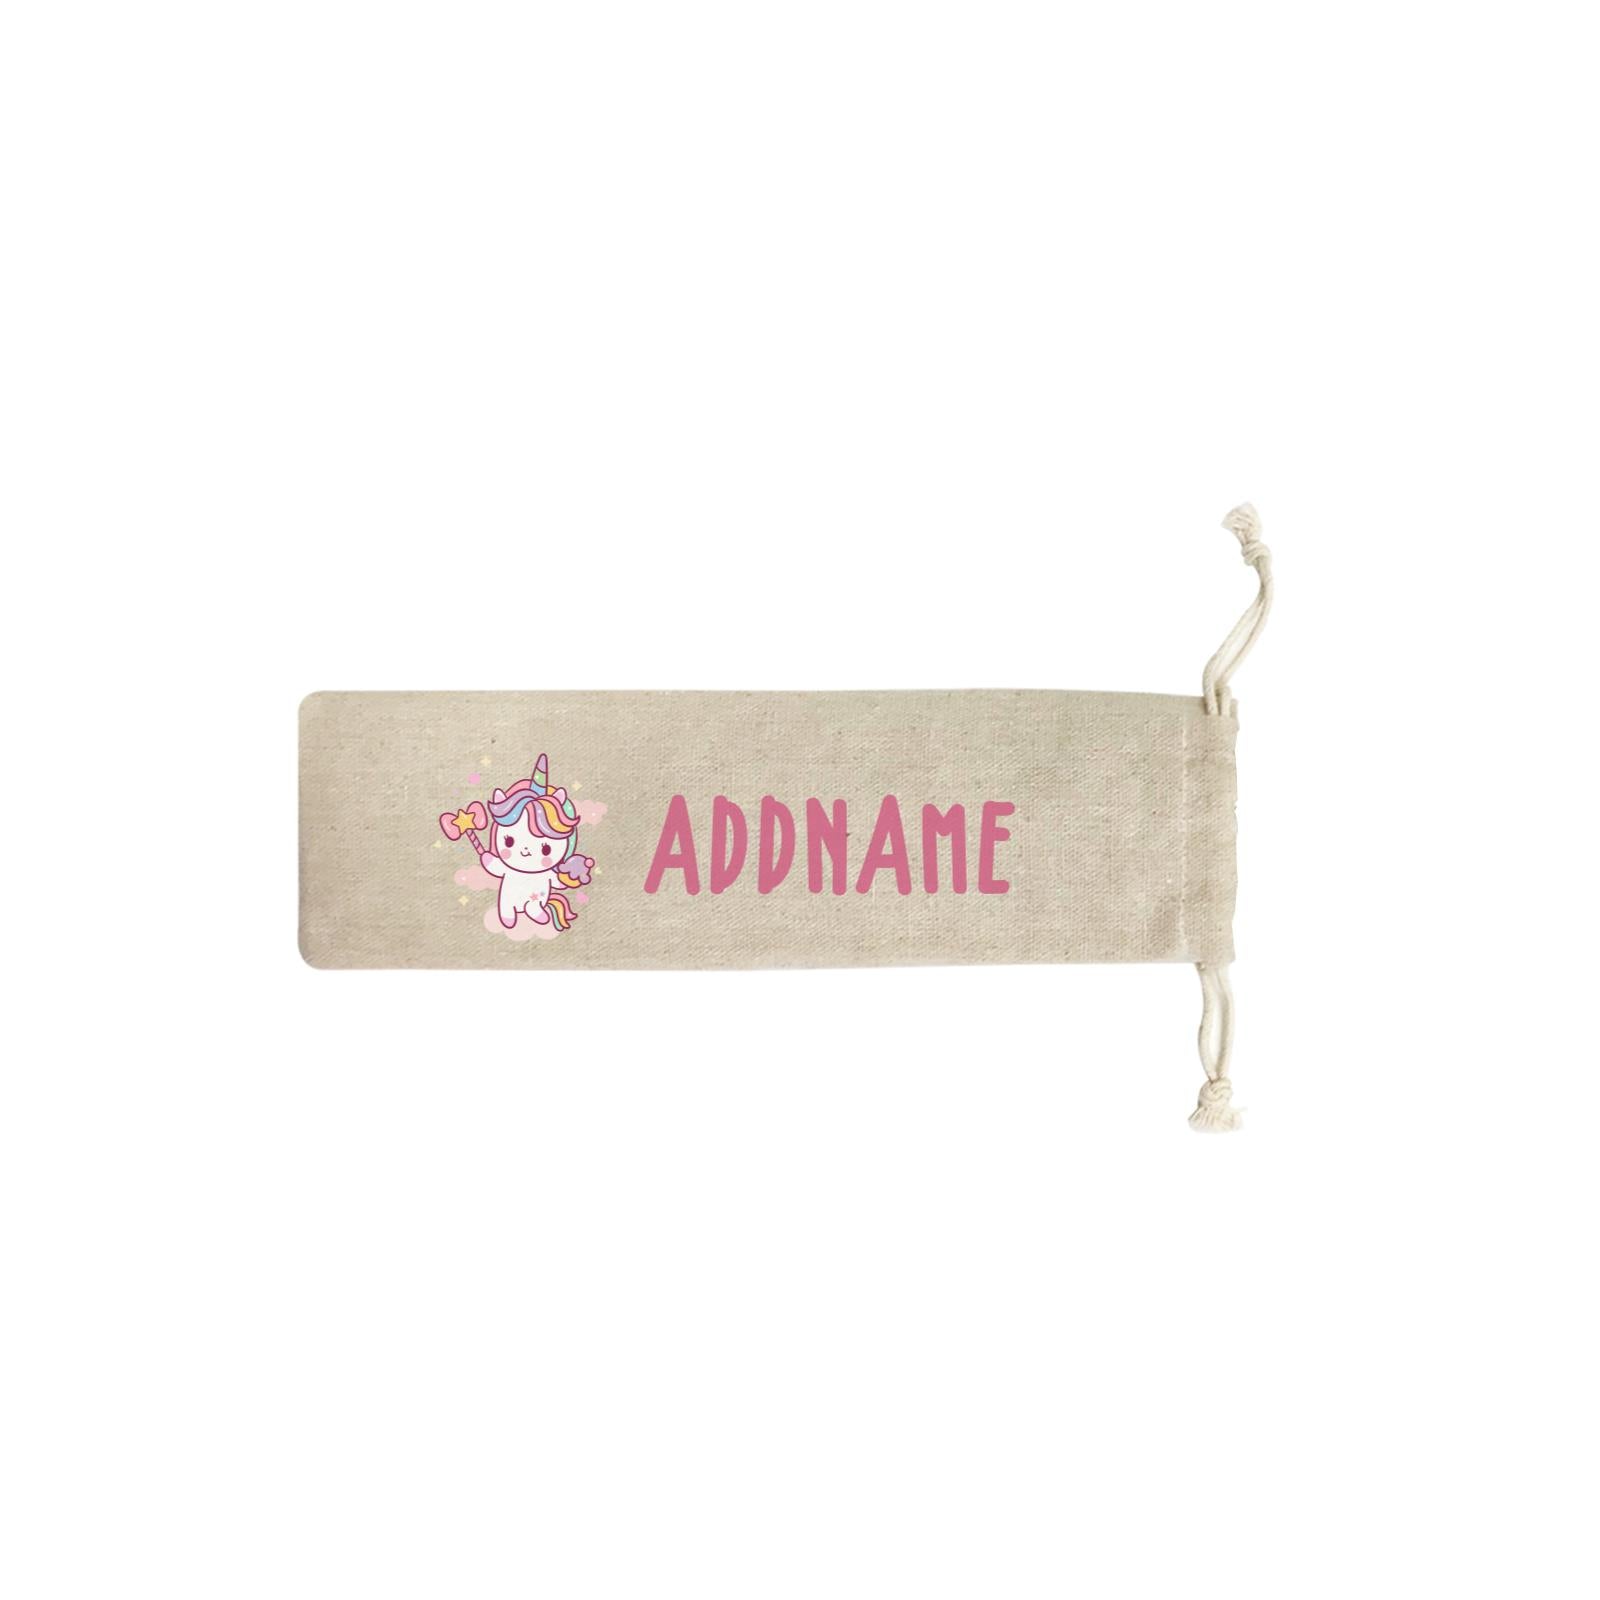 Unicorn And Princess Series Cute Unicorn Holding Magic Wand Addname SB Straw Pouch (No Straws included)